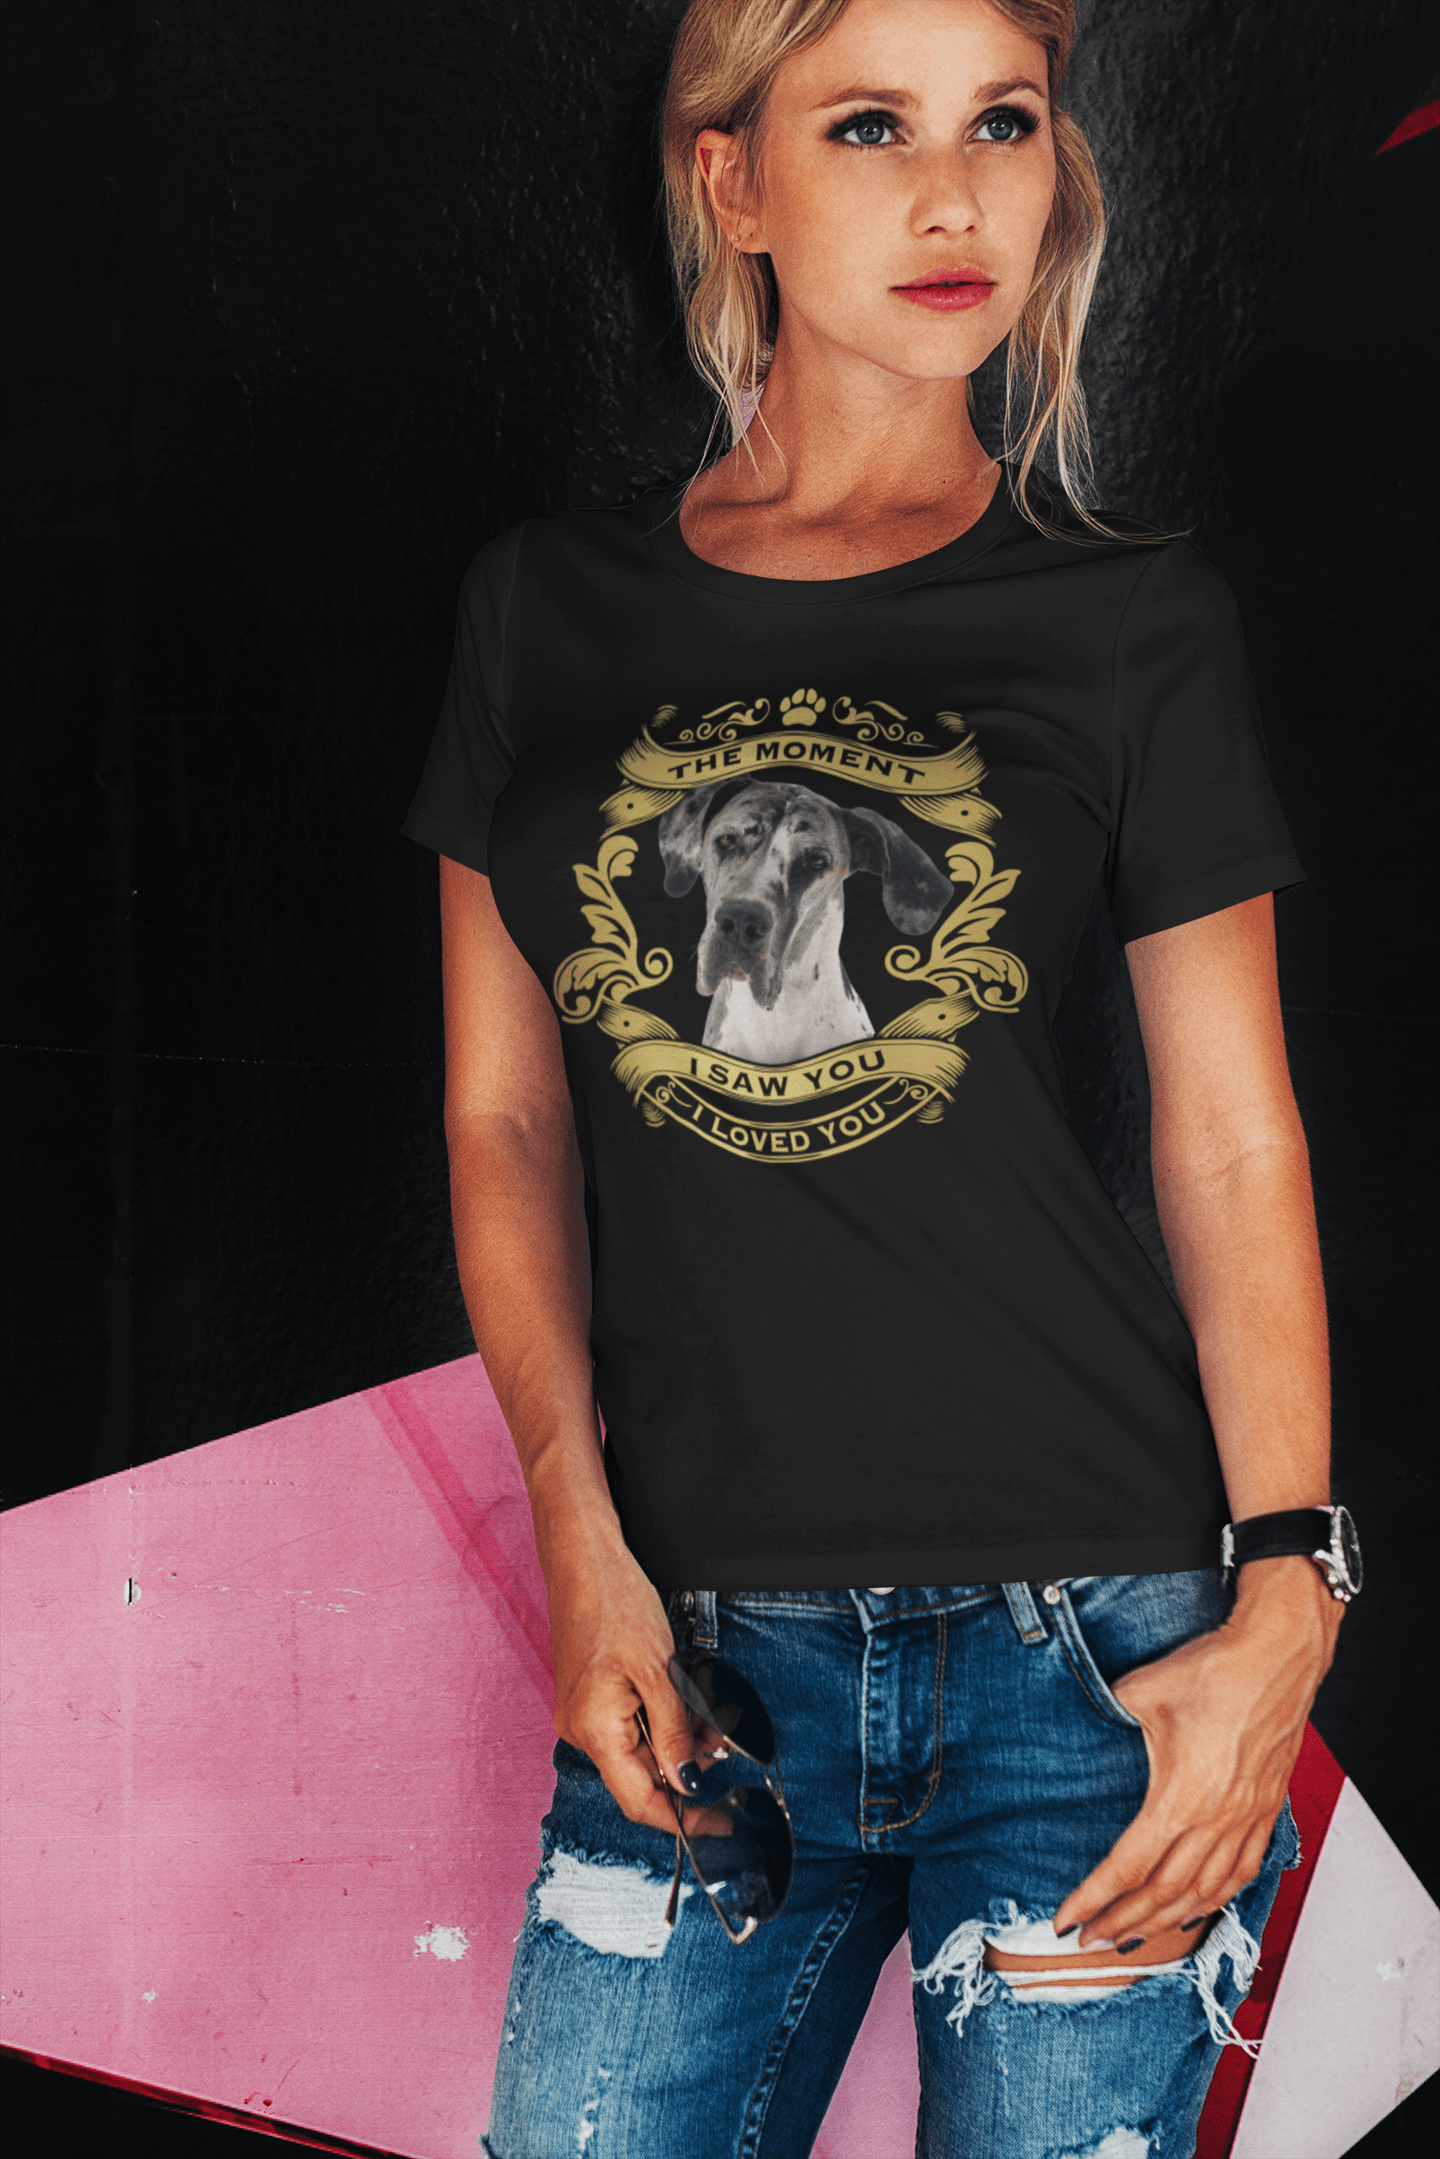 ULTRABASIC Women's Organic T-Shirt Great Dane Dog - Moment I Saw You I Loved You Puppy Tee Shirt for Ladies